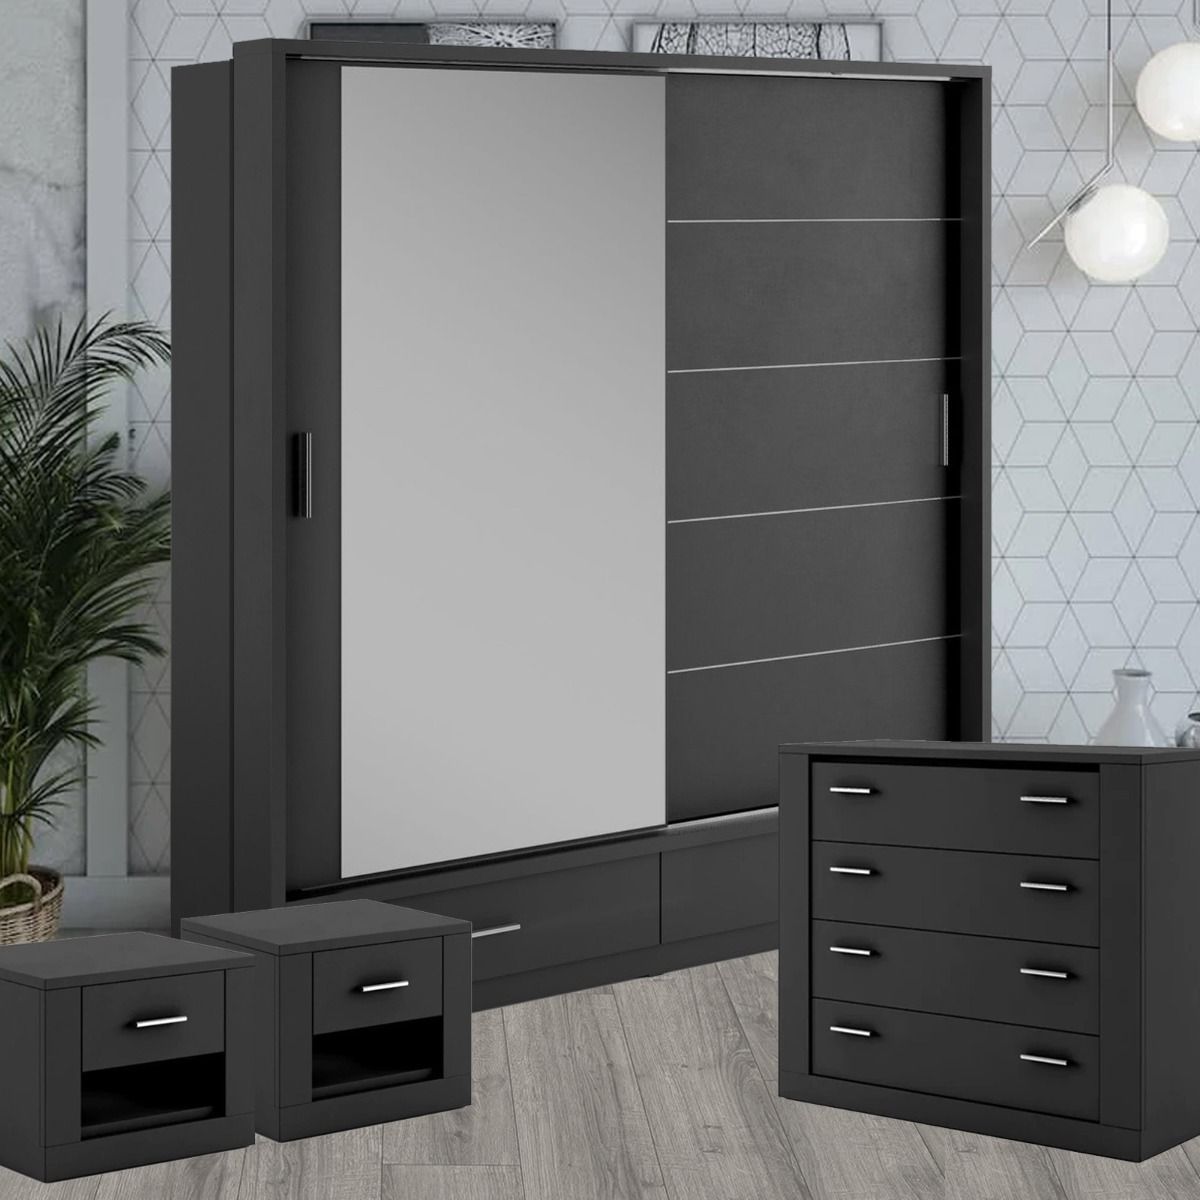 Bedroom Furniture Sets On Sale | Wardrobe Direct™ In Wardrobes And Chest Of Drawers Combined (View 15 of 20)